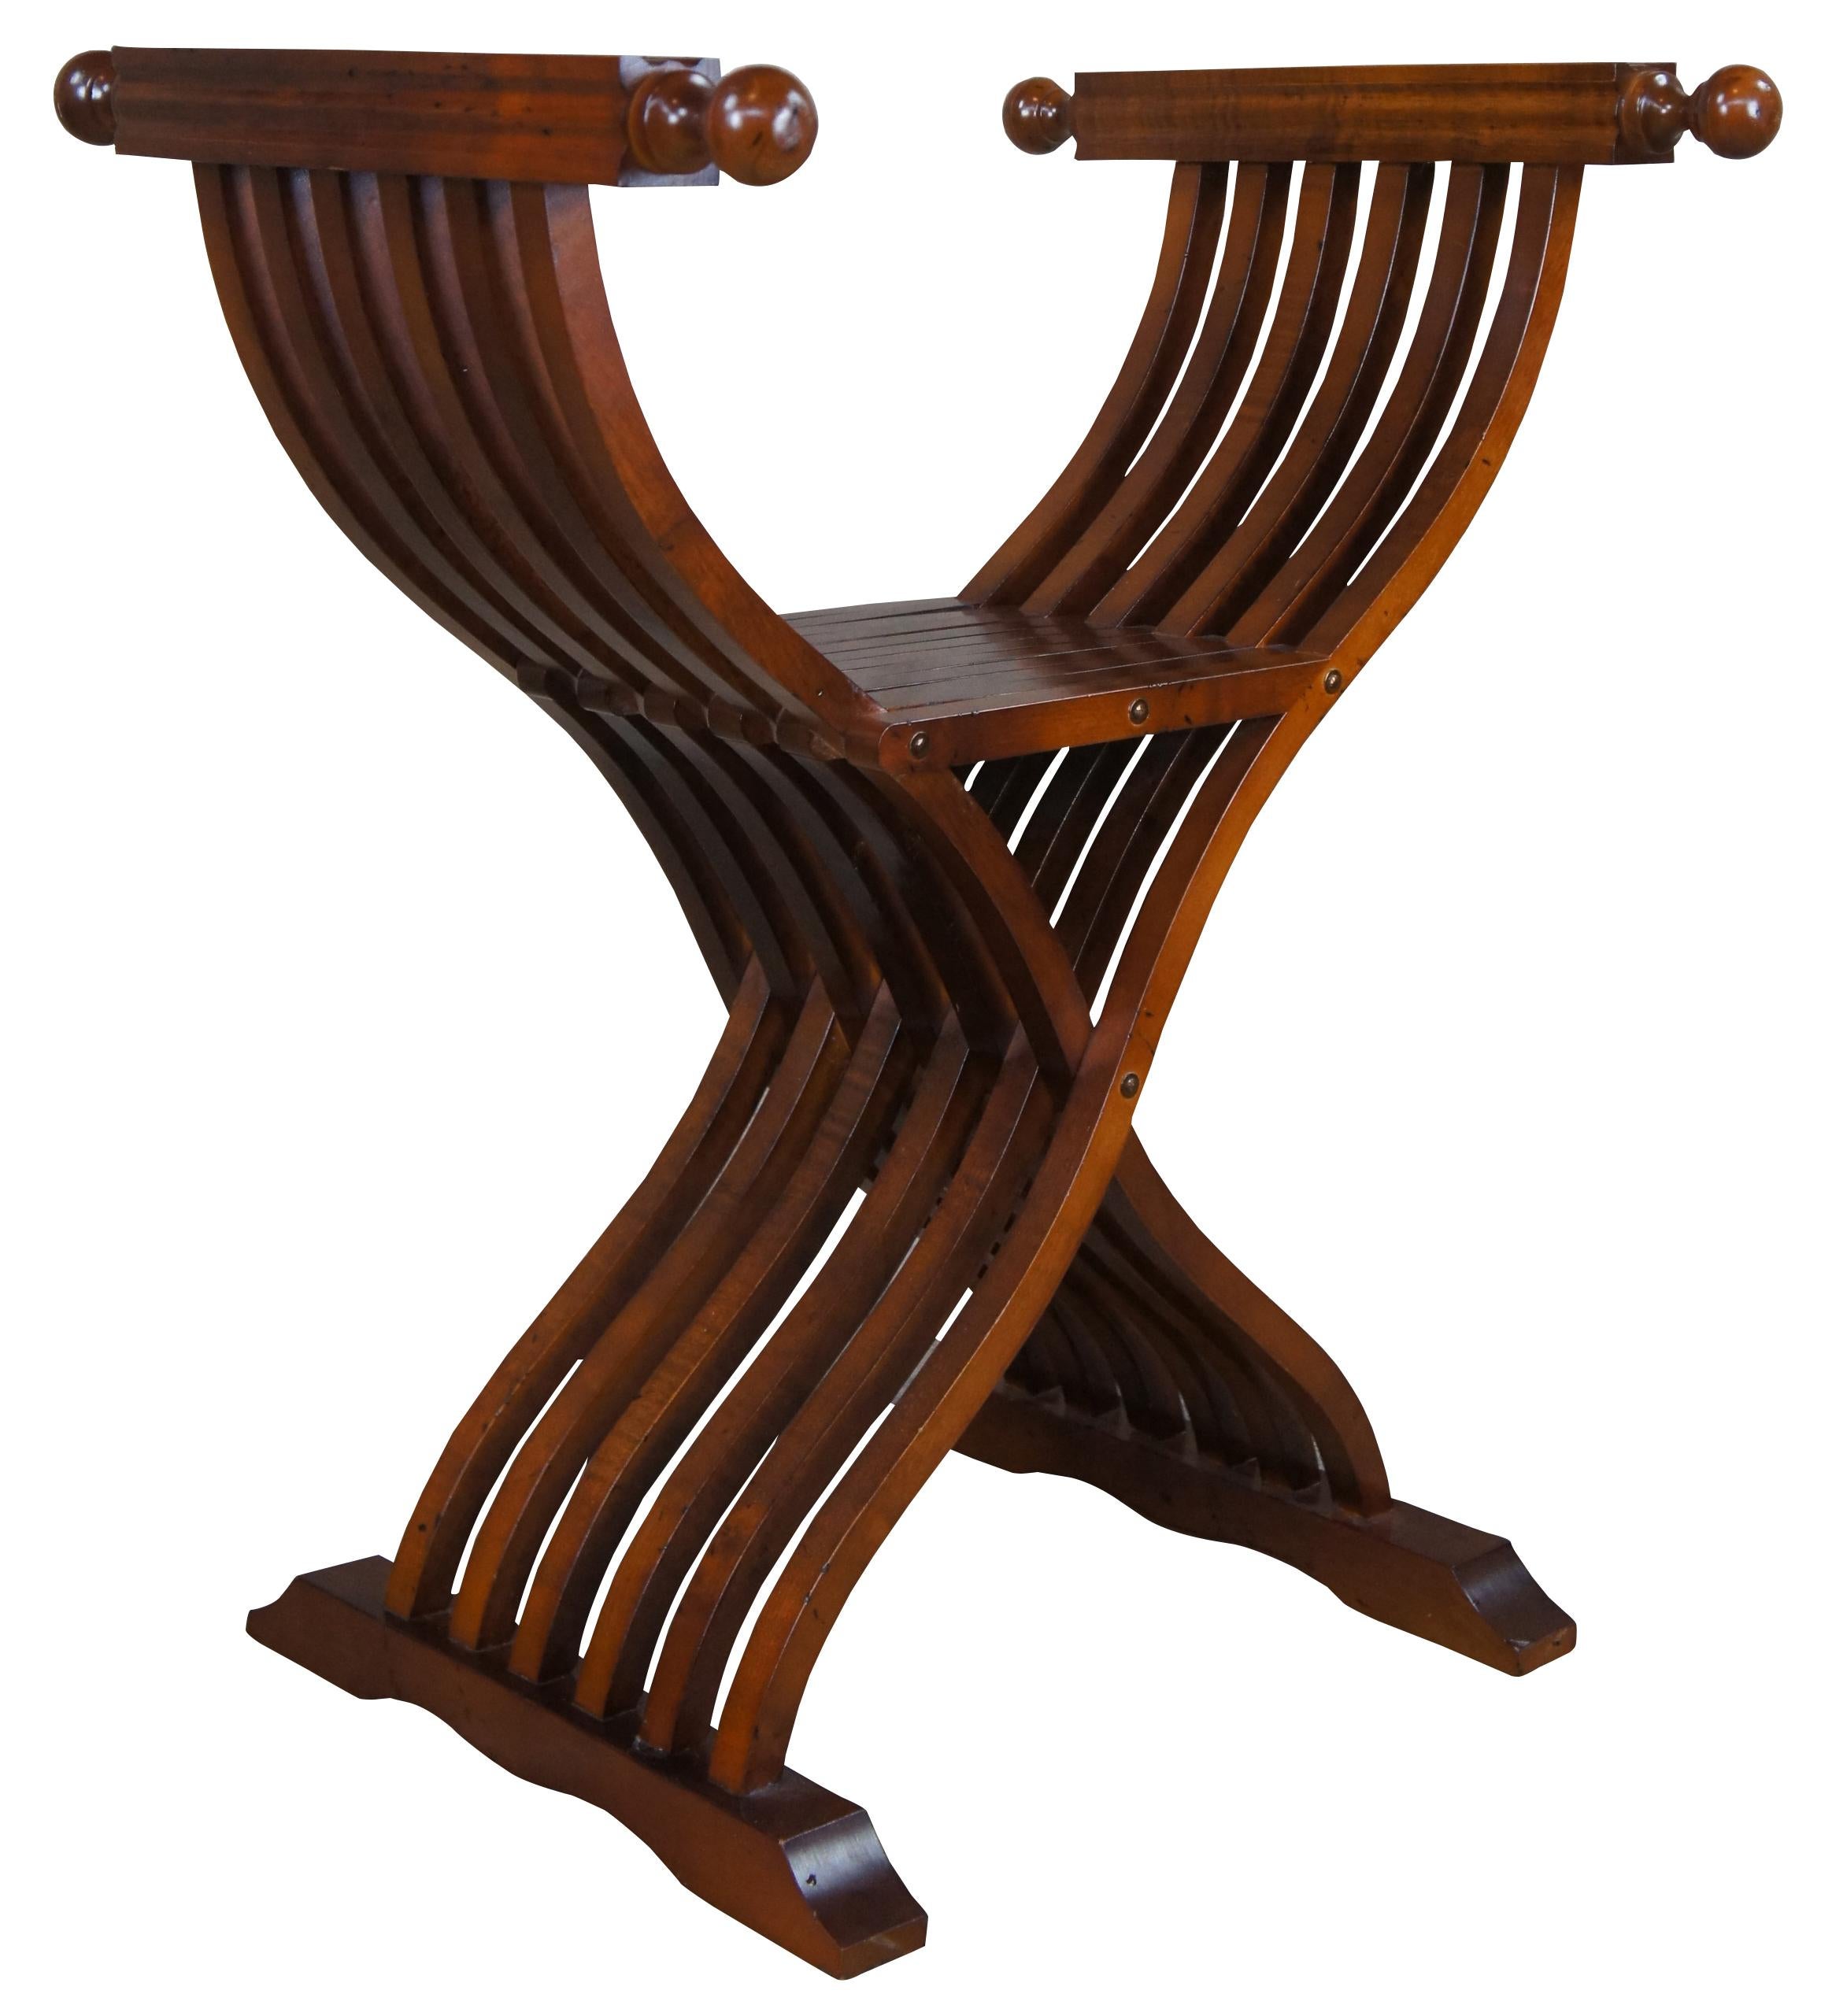 Solid mahogany Italian made Savonarola chair. Circa 1980s. Traditional styling with an X form folding base. Features square fluted arm rests leading to knobbed ends. Marked along the bottom; Made in Italy, Style no 266

Size folded - 6